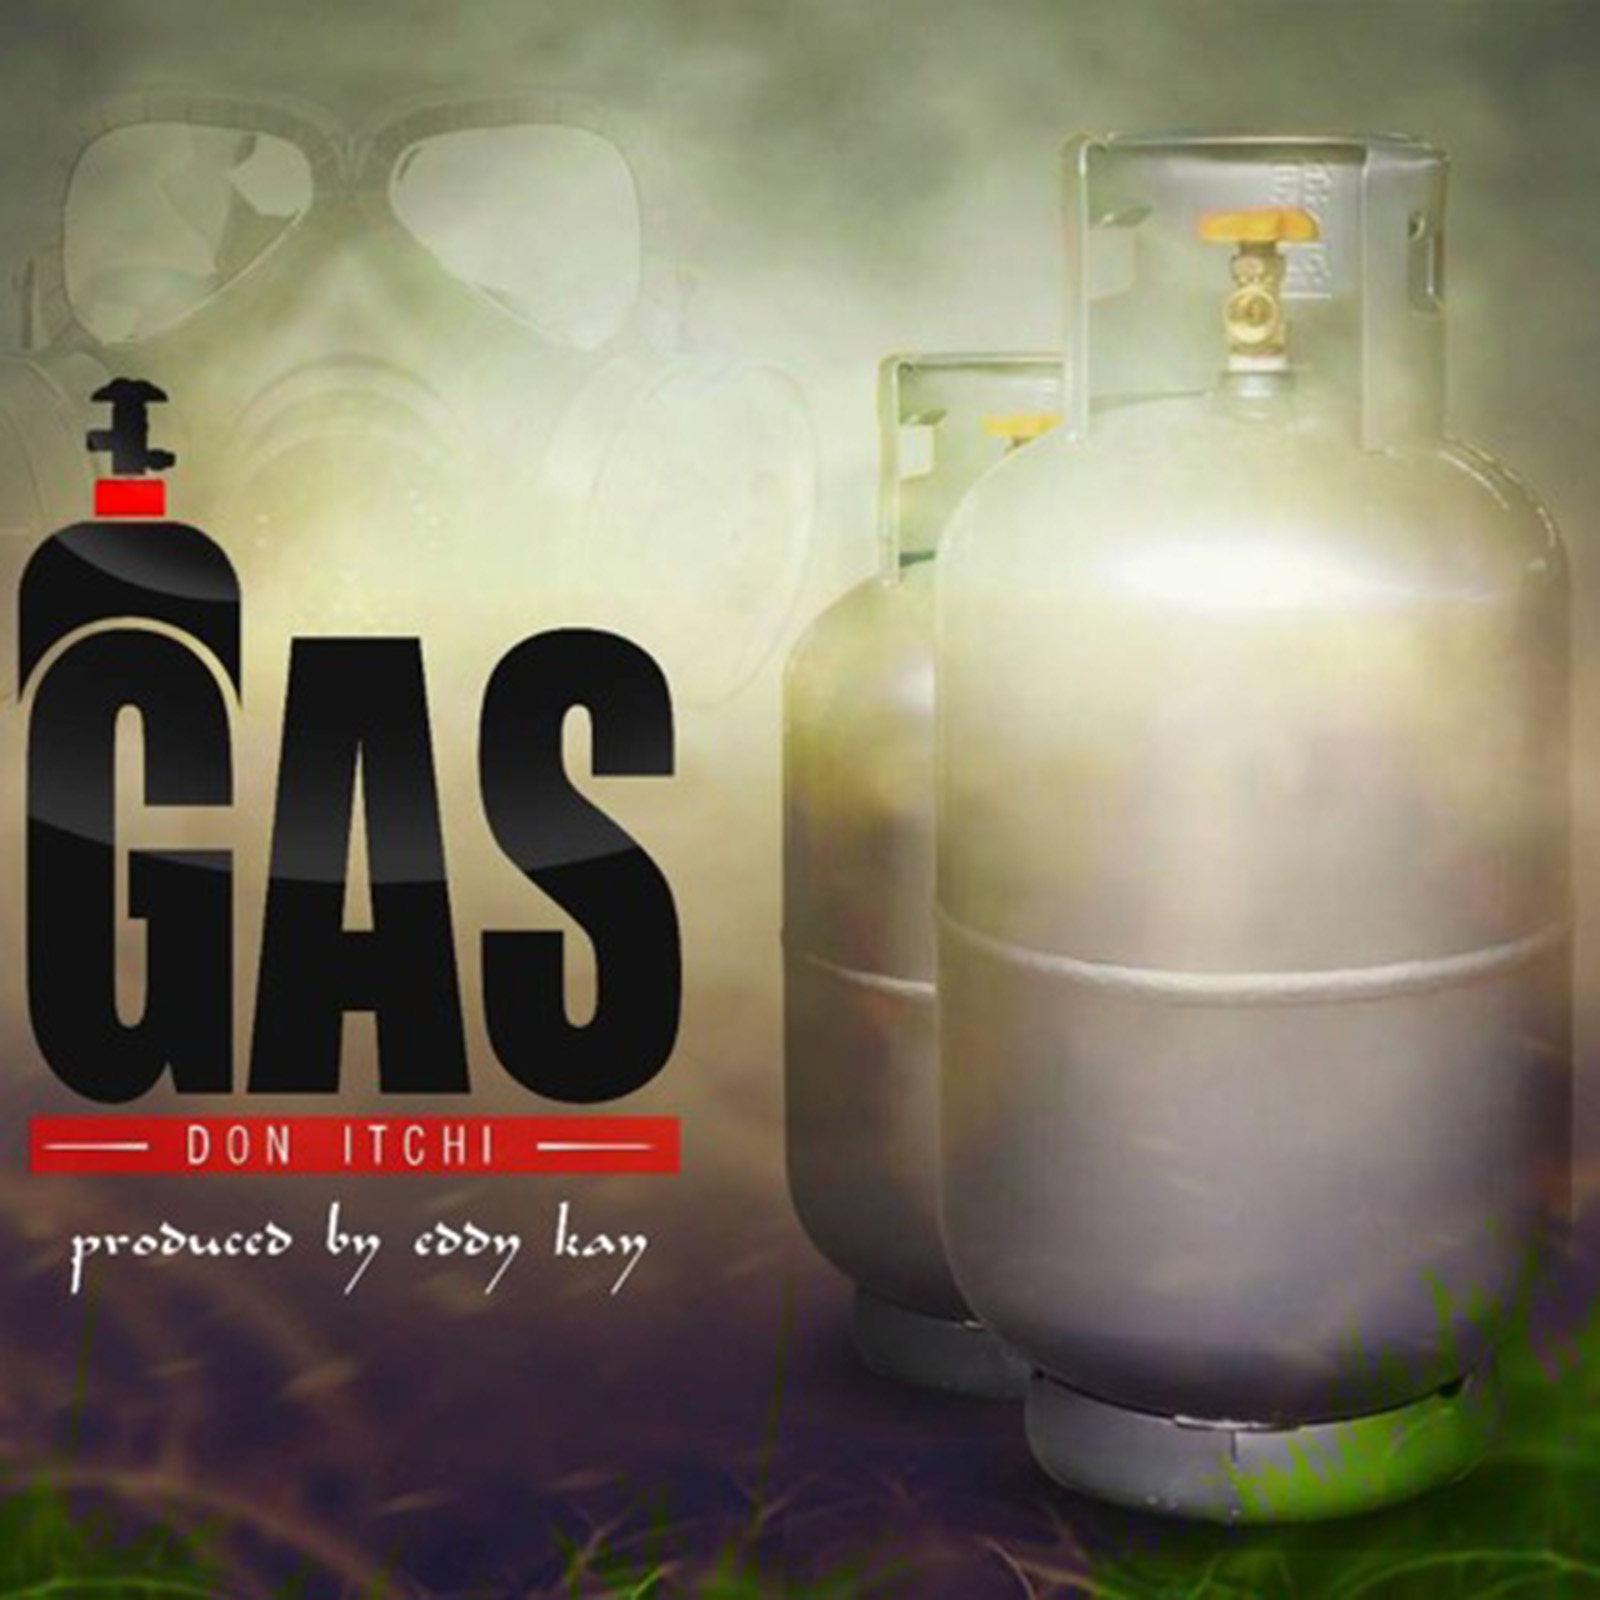 Gas (Strongman Diss) by Don Itchi